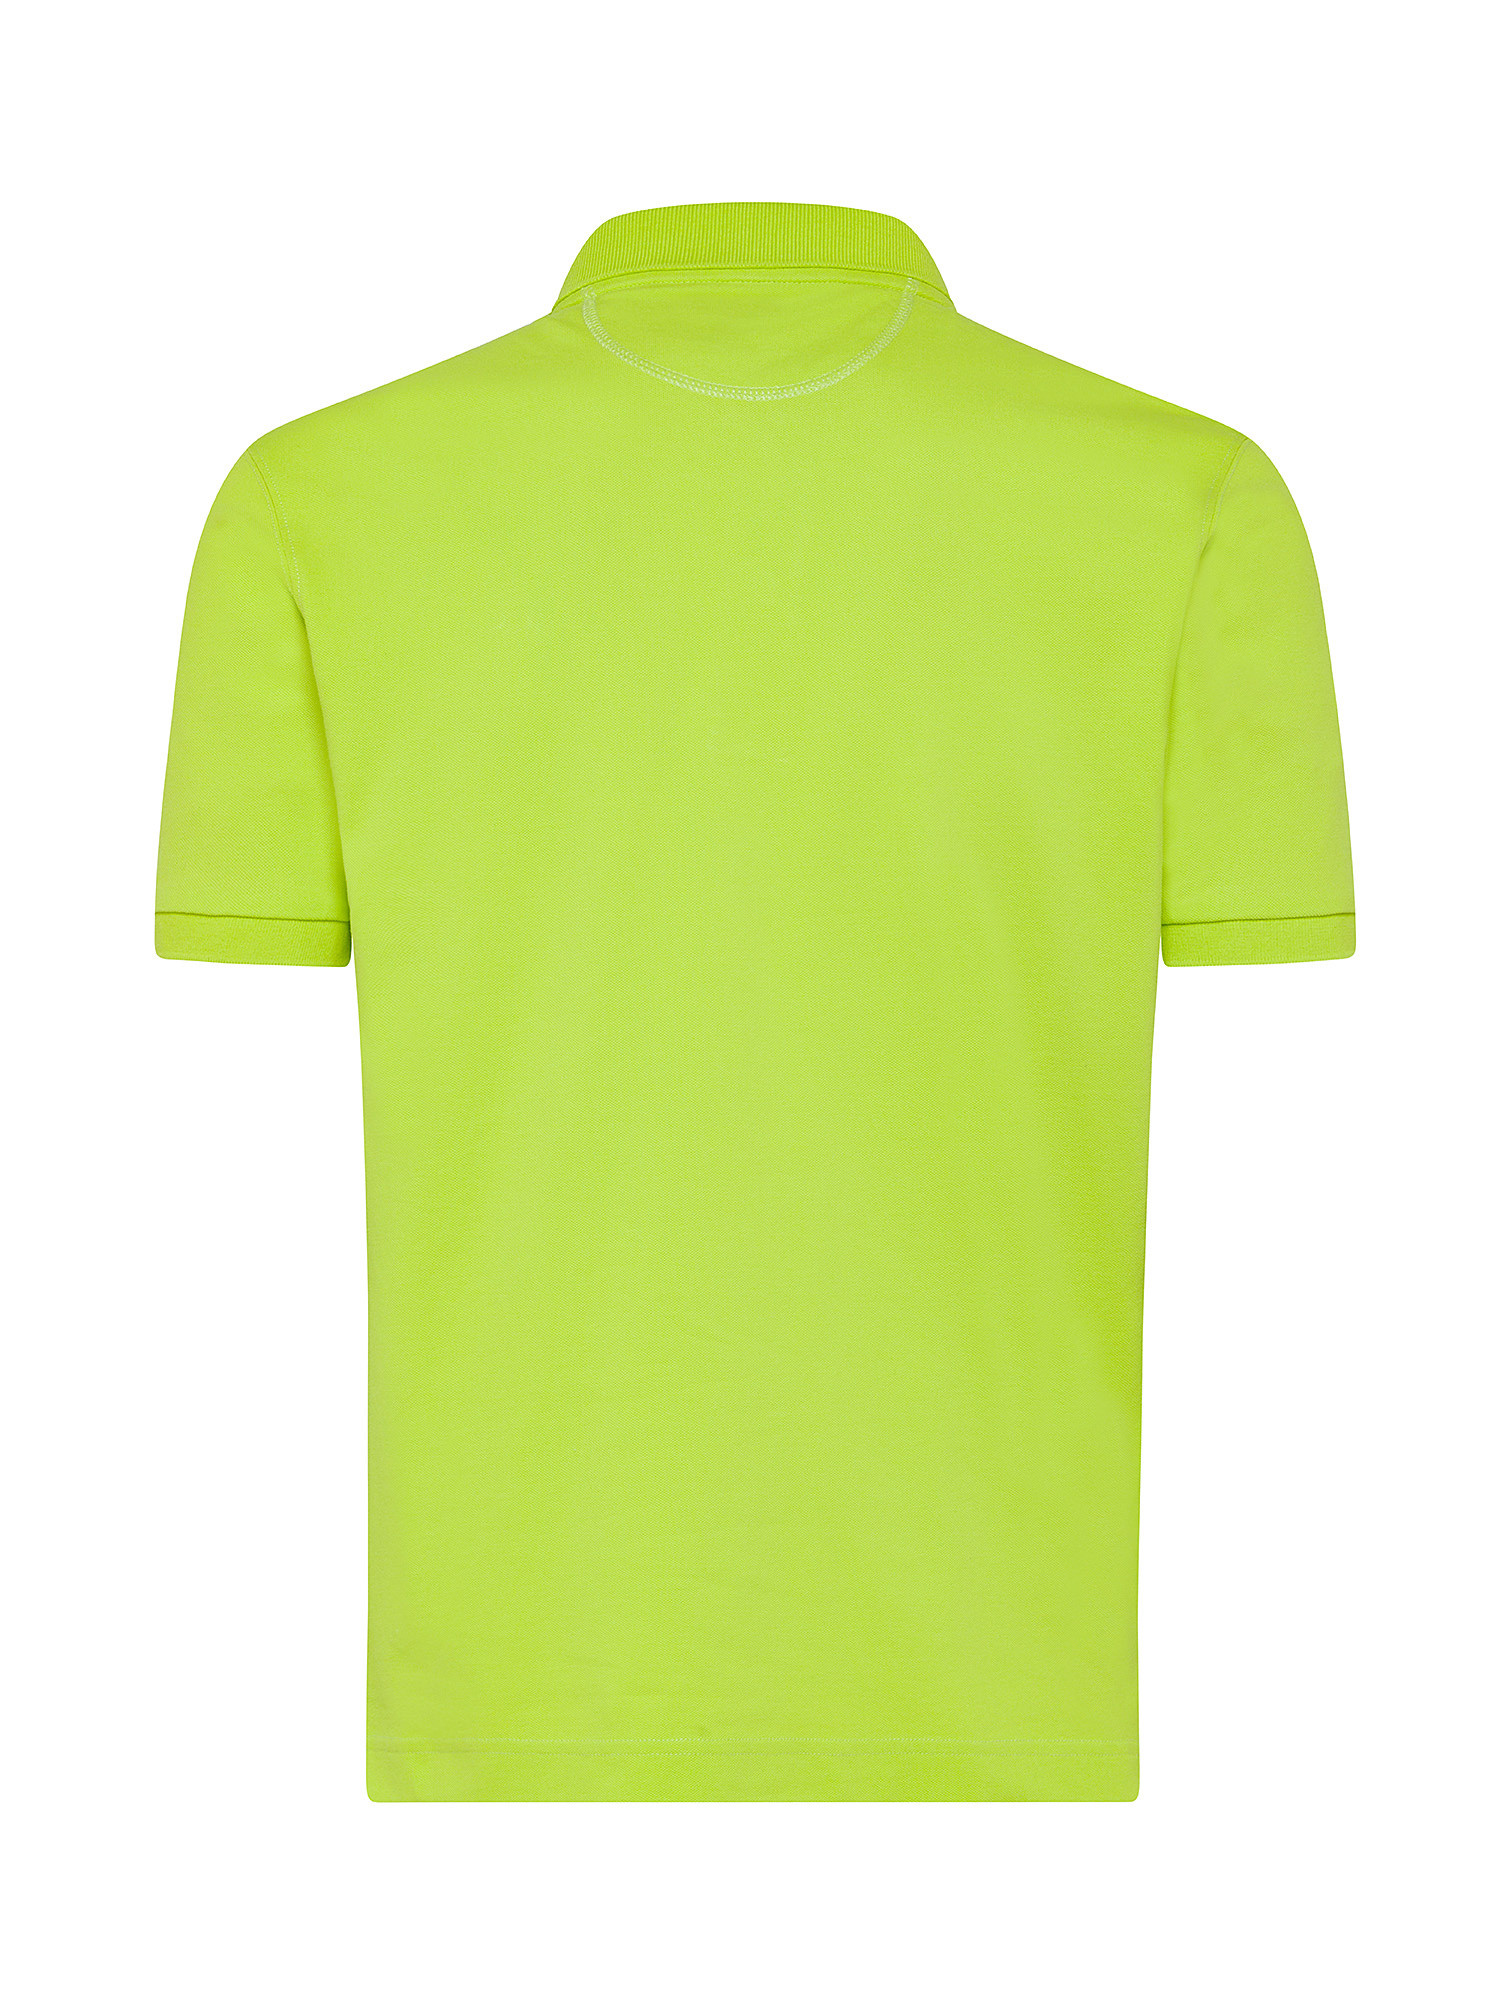 La Martina - Short-sleeved polo shirt in stretch piqué, Yellow, large image number 1